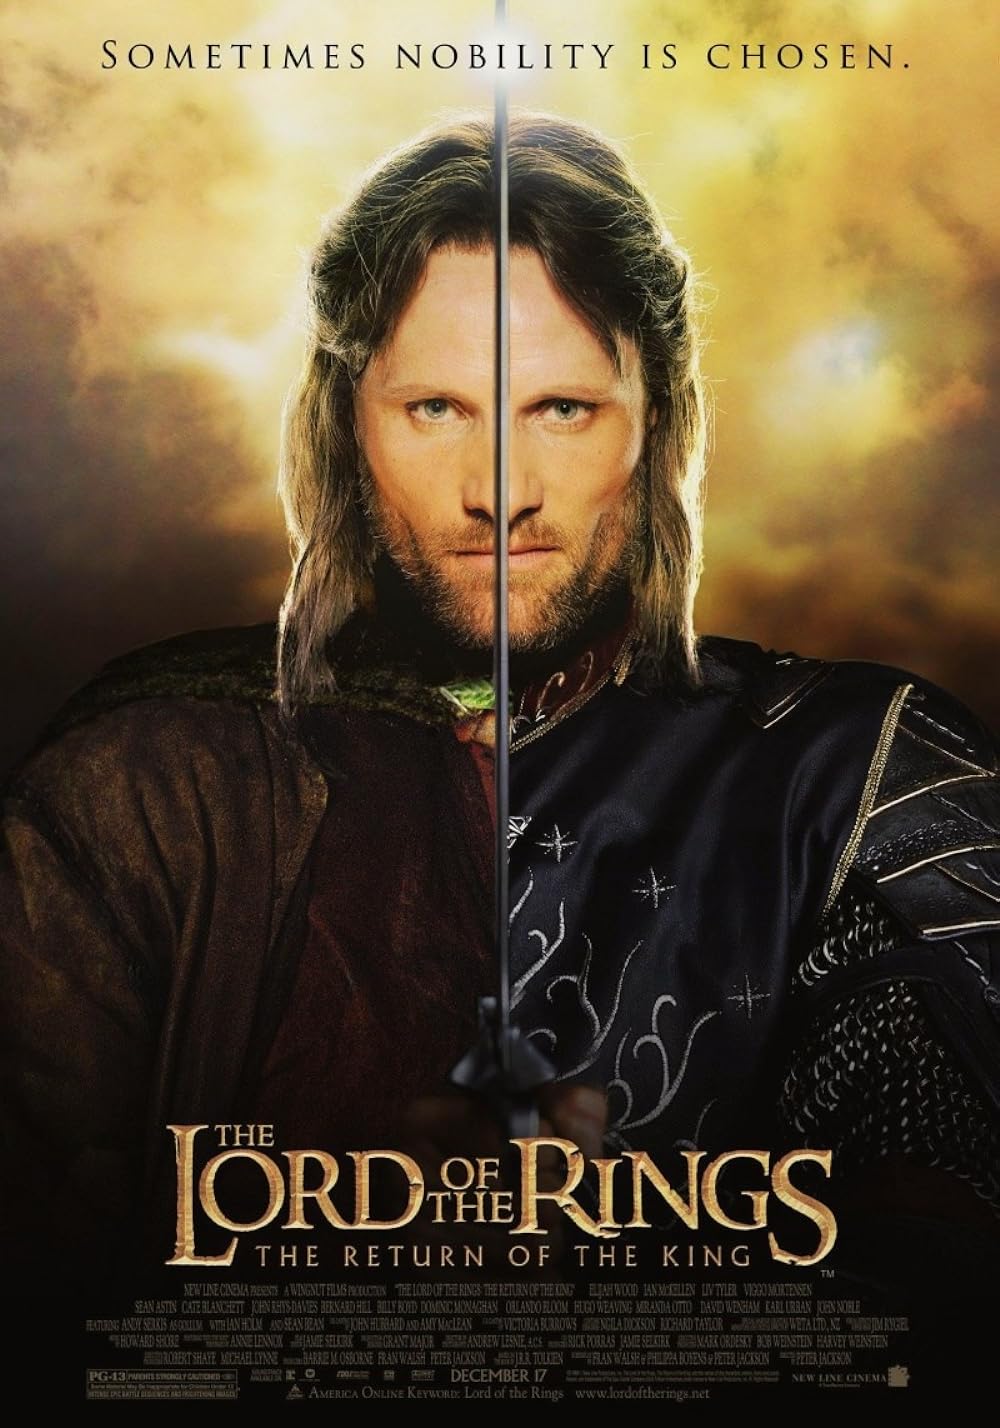 The Lord of the Rings: The Return of the King (2003) Remastered Extended Edition 640Kbps 23.976Fps 48Khz 5.1Ch BluRay Turkish Audio TAC